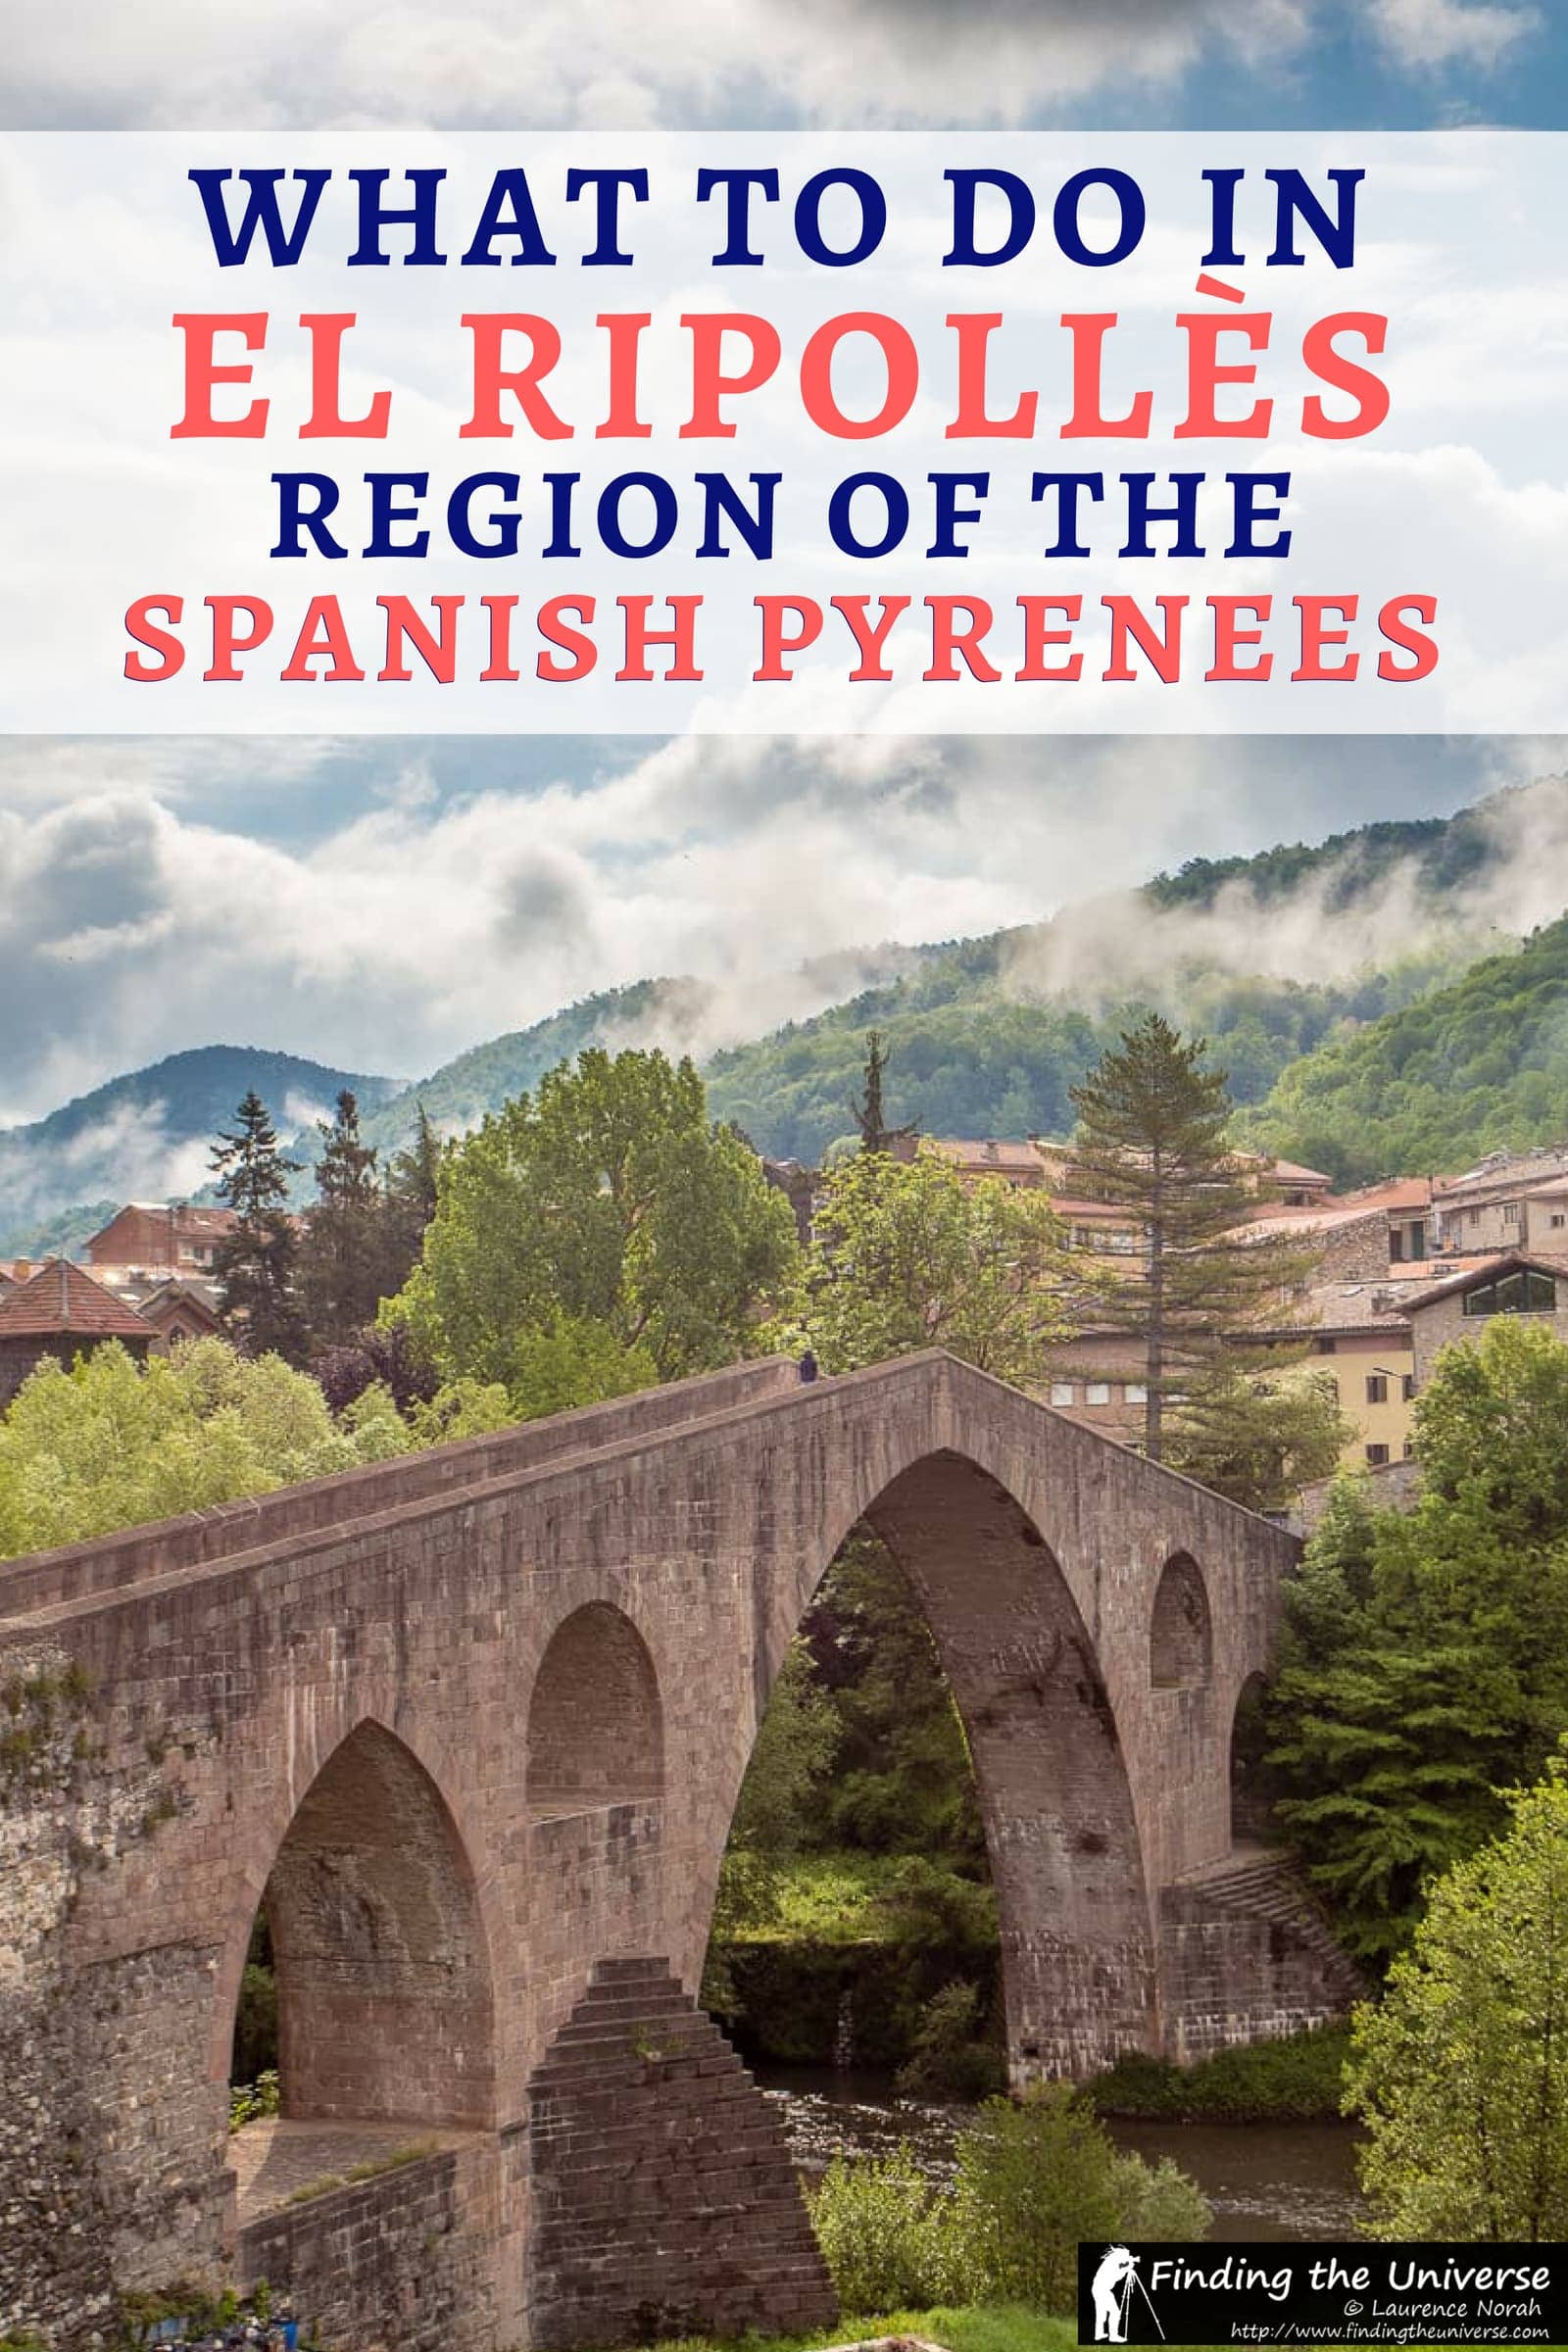 A detailed guide to what to do in the El Ripollès region of the Spanish Pyrenees, including what to see, highlights of the area, tips on getting here and around, and where to stay!